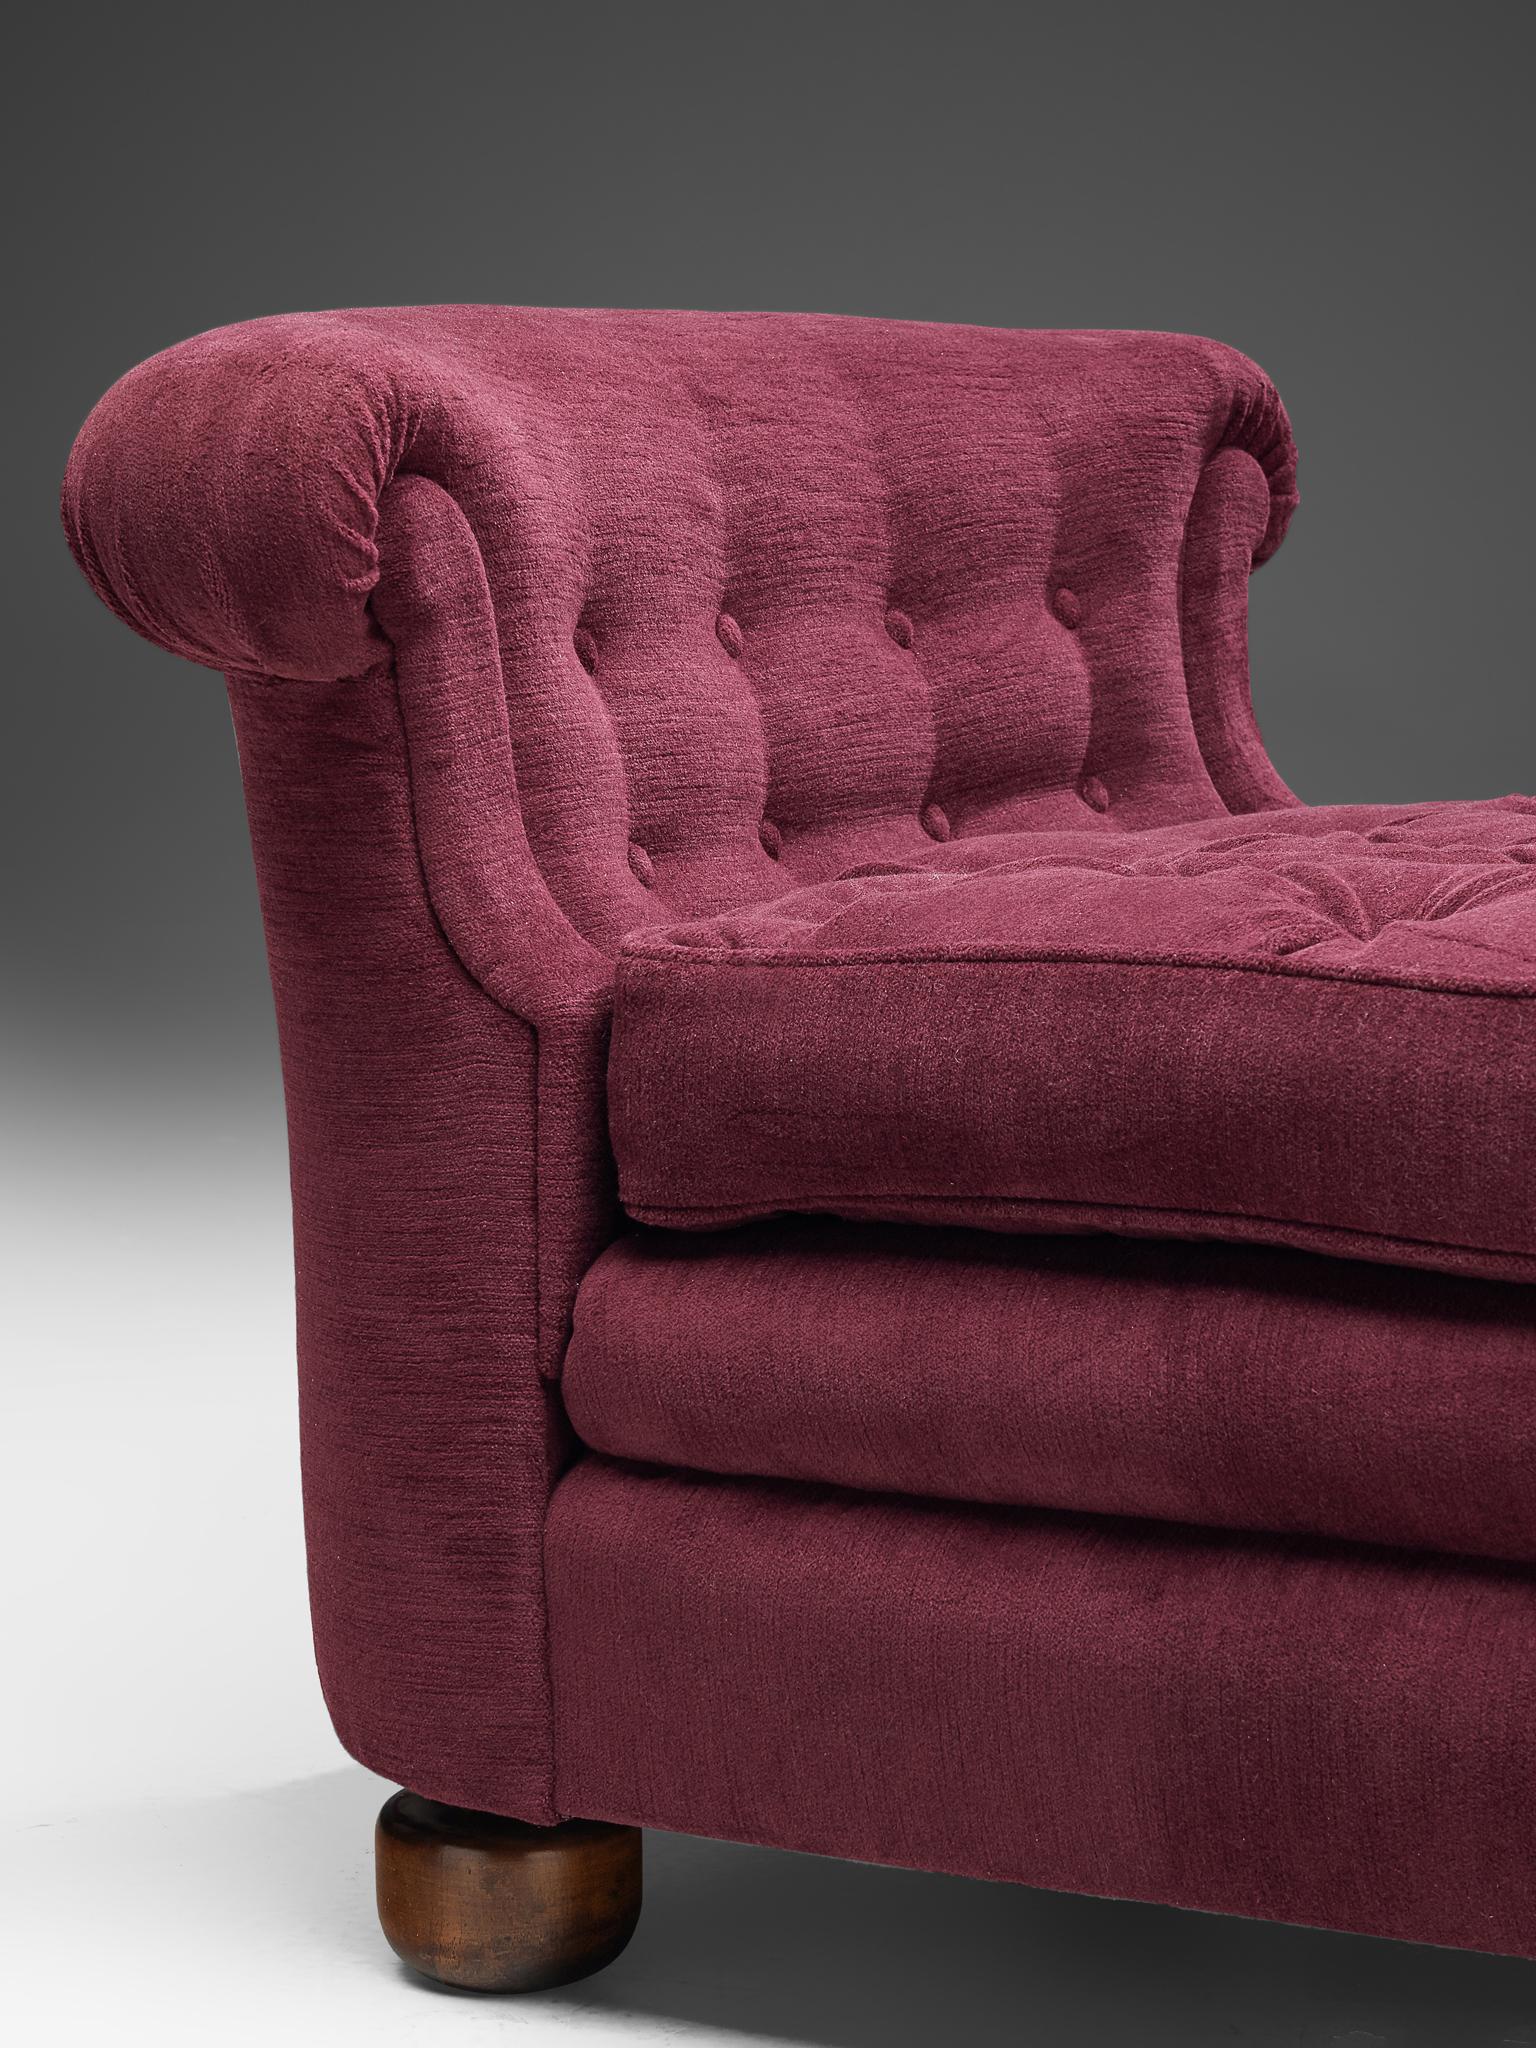 Mid-20th Century Josef Frank Reupholstered Daybed in Burgundy Fabric